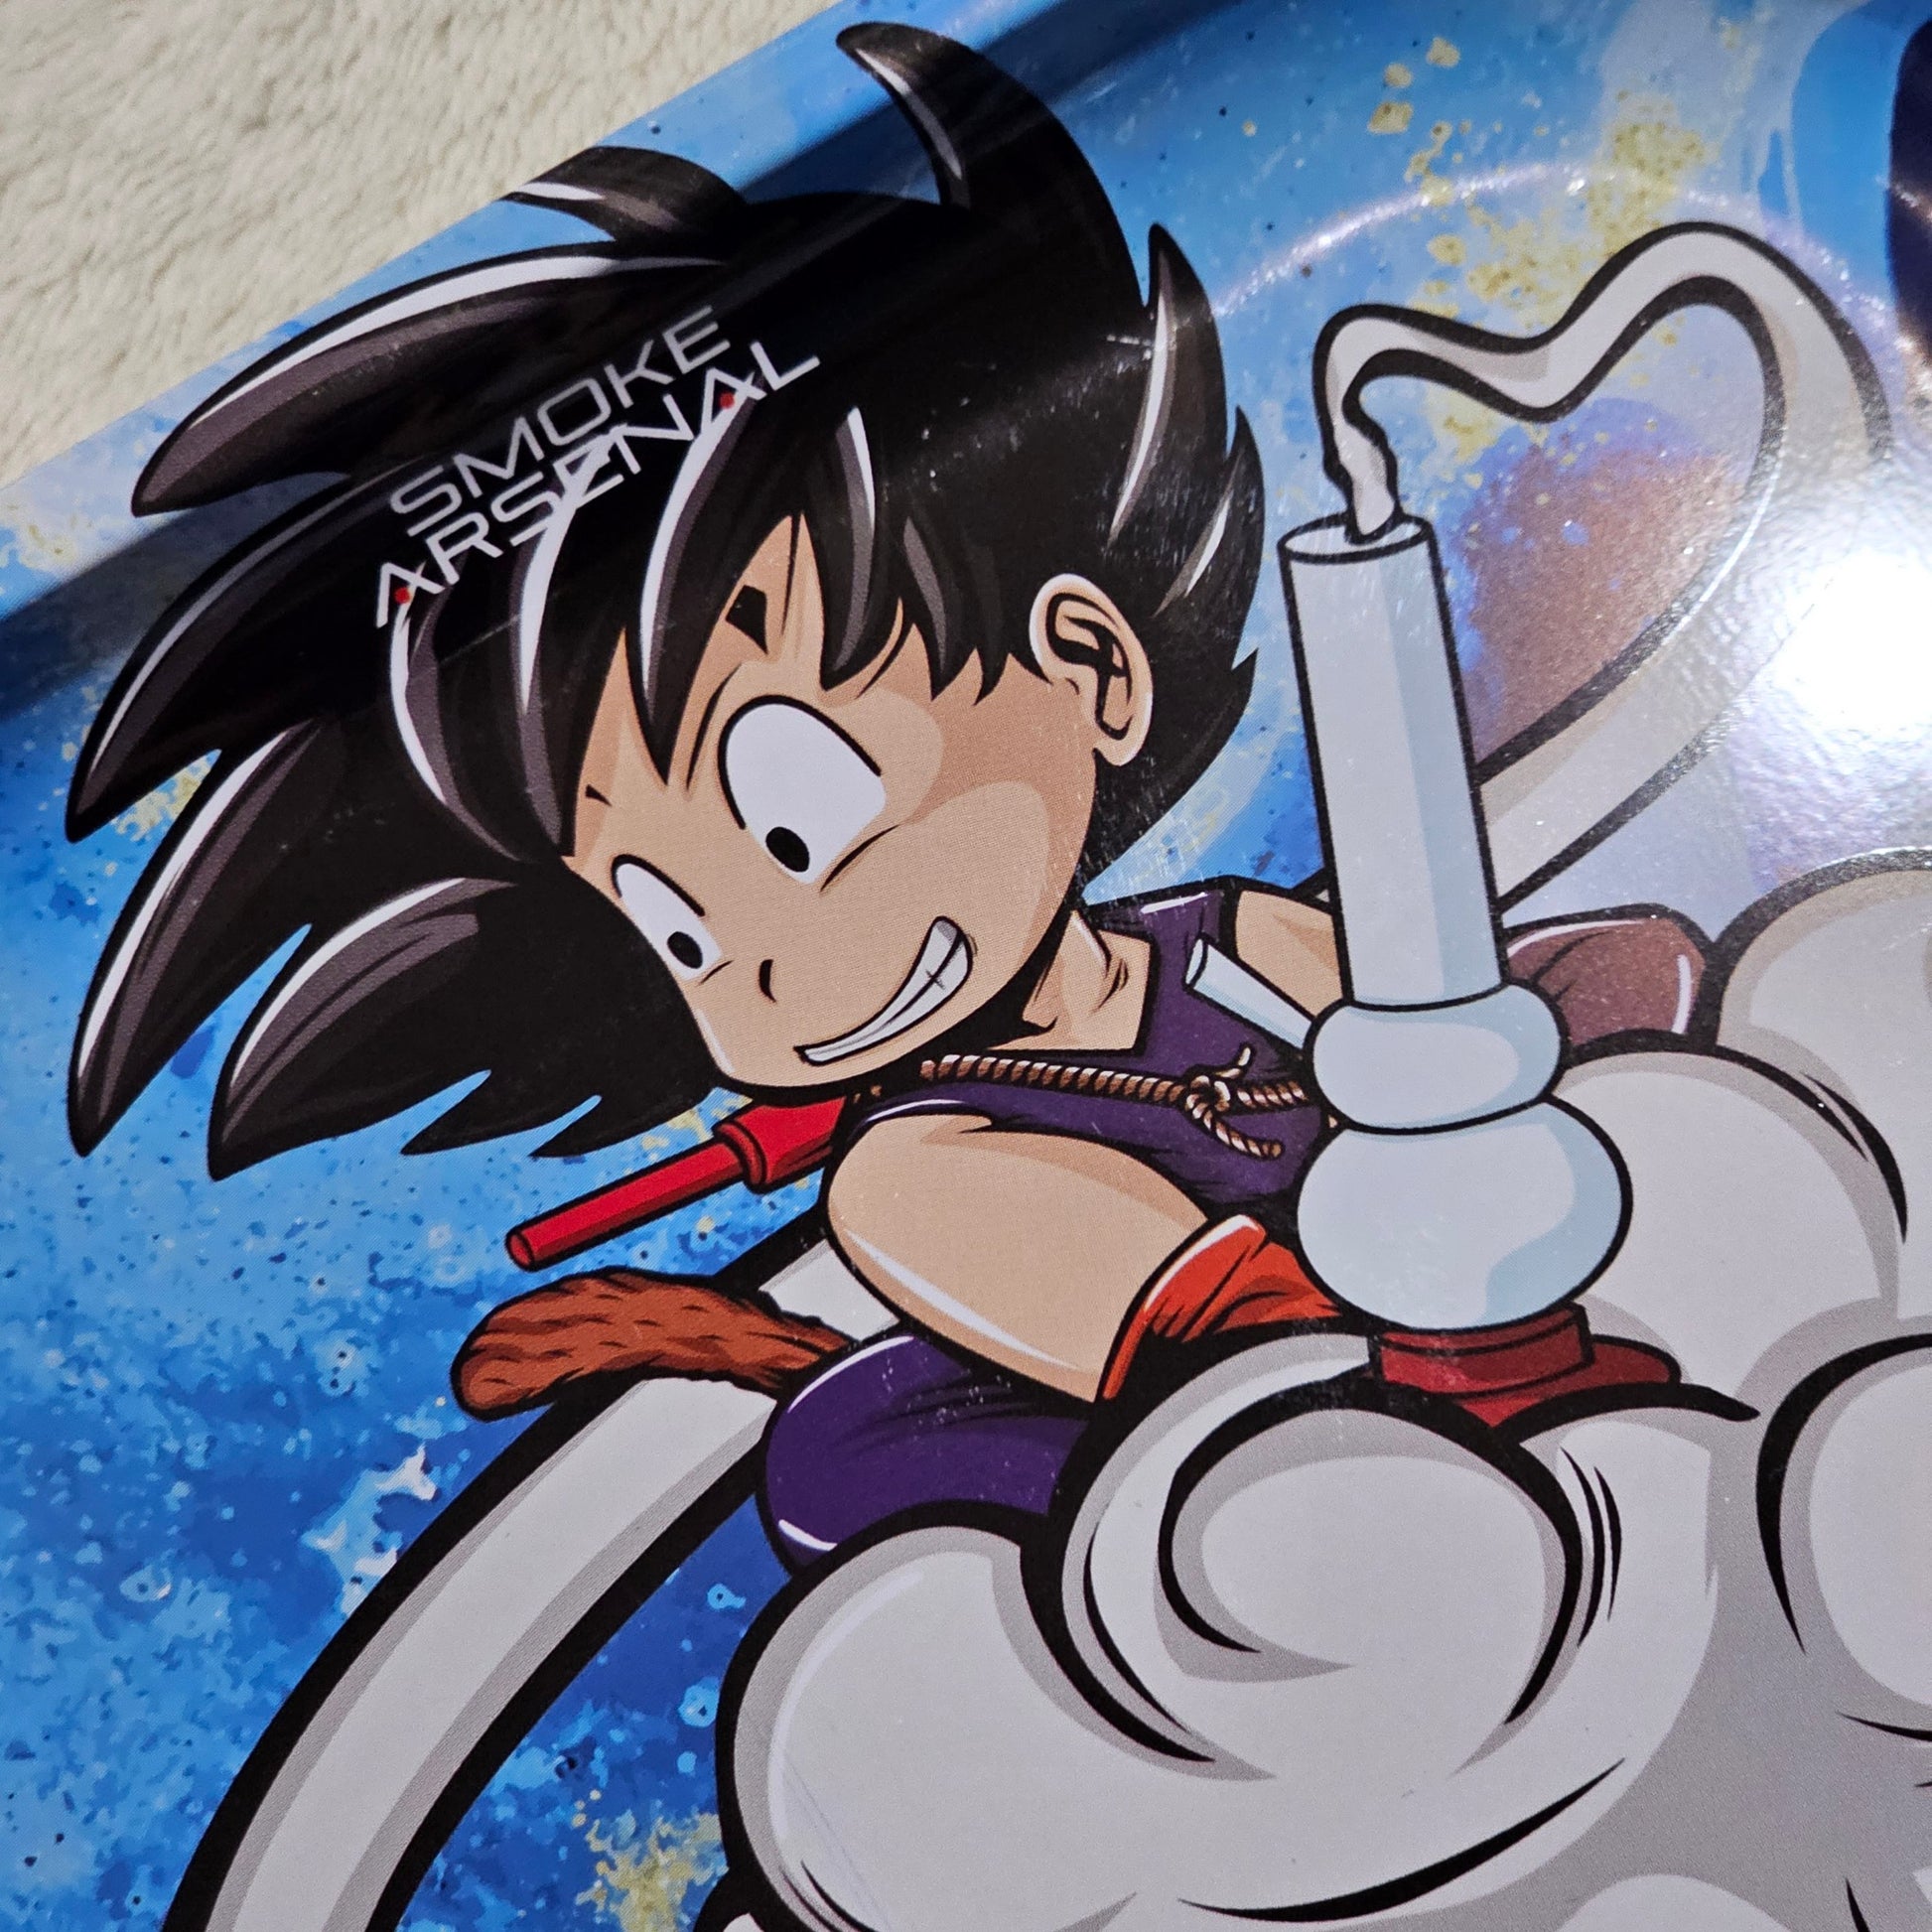 Young Smokie Tray | Bright Blended Colors Curved Edges Goku Graphic - A Gothic Universe - Trays